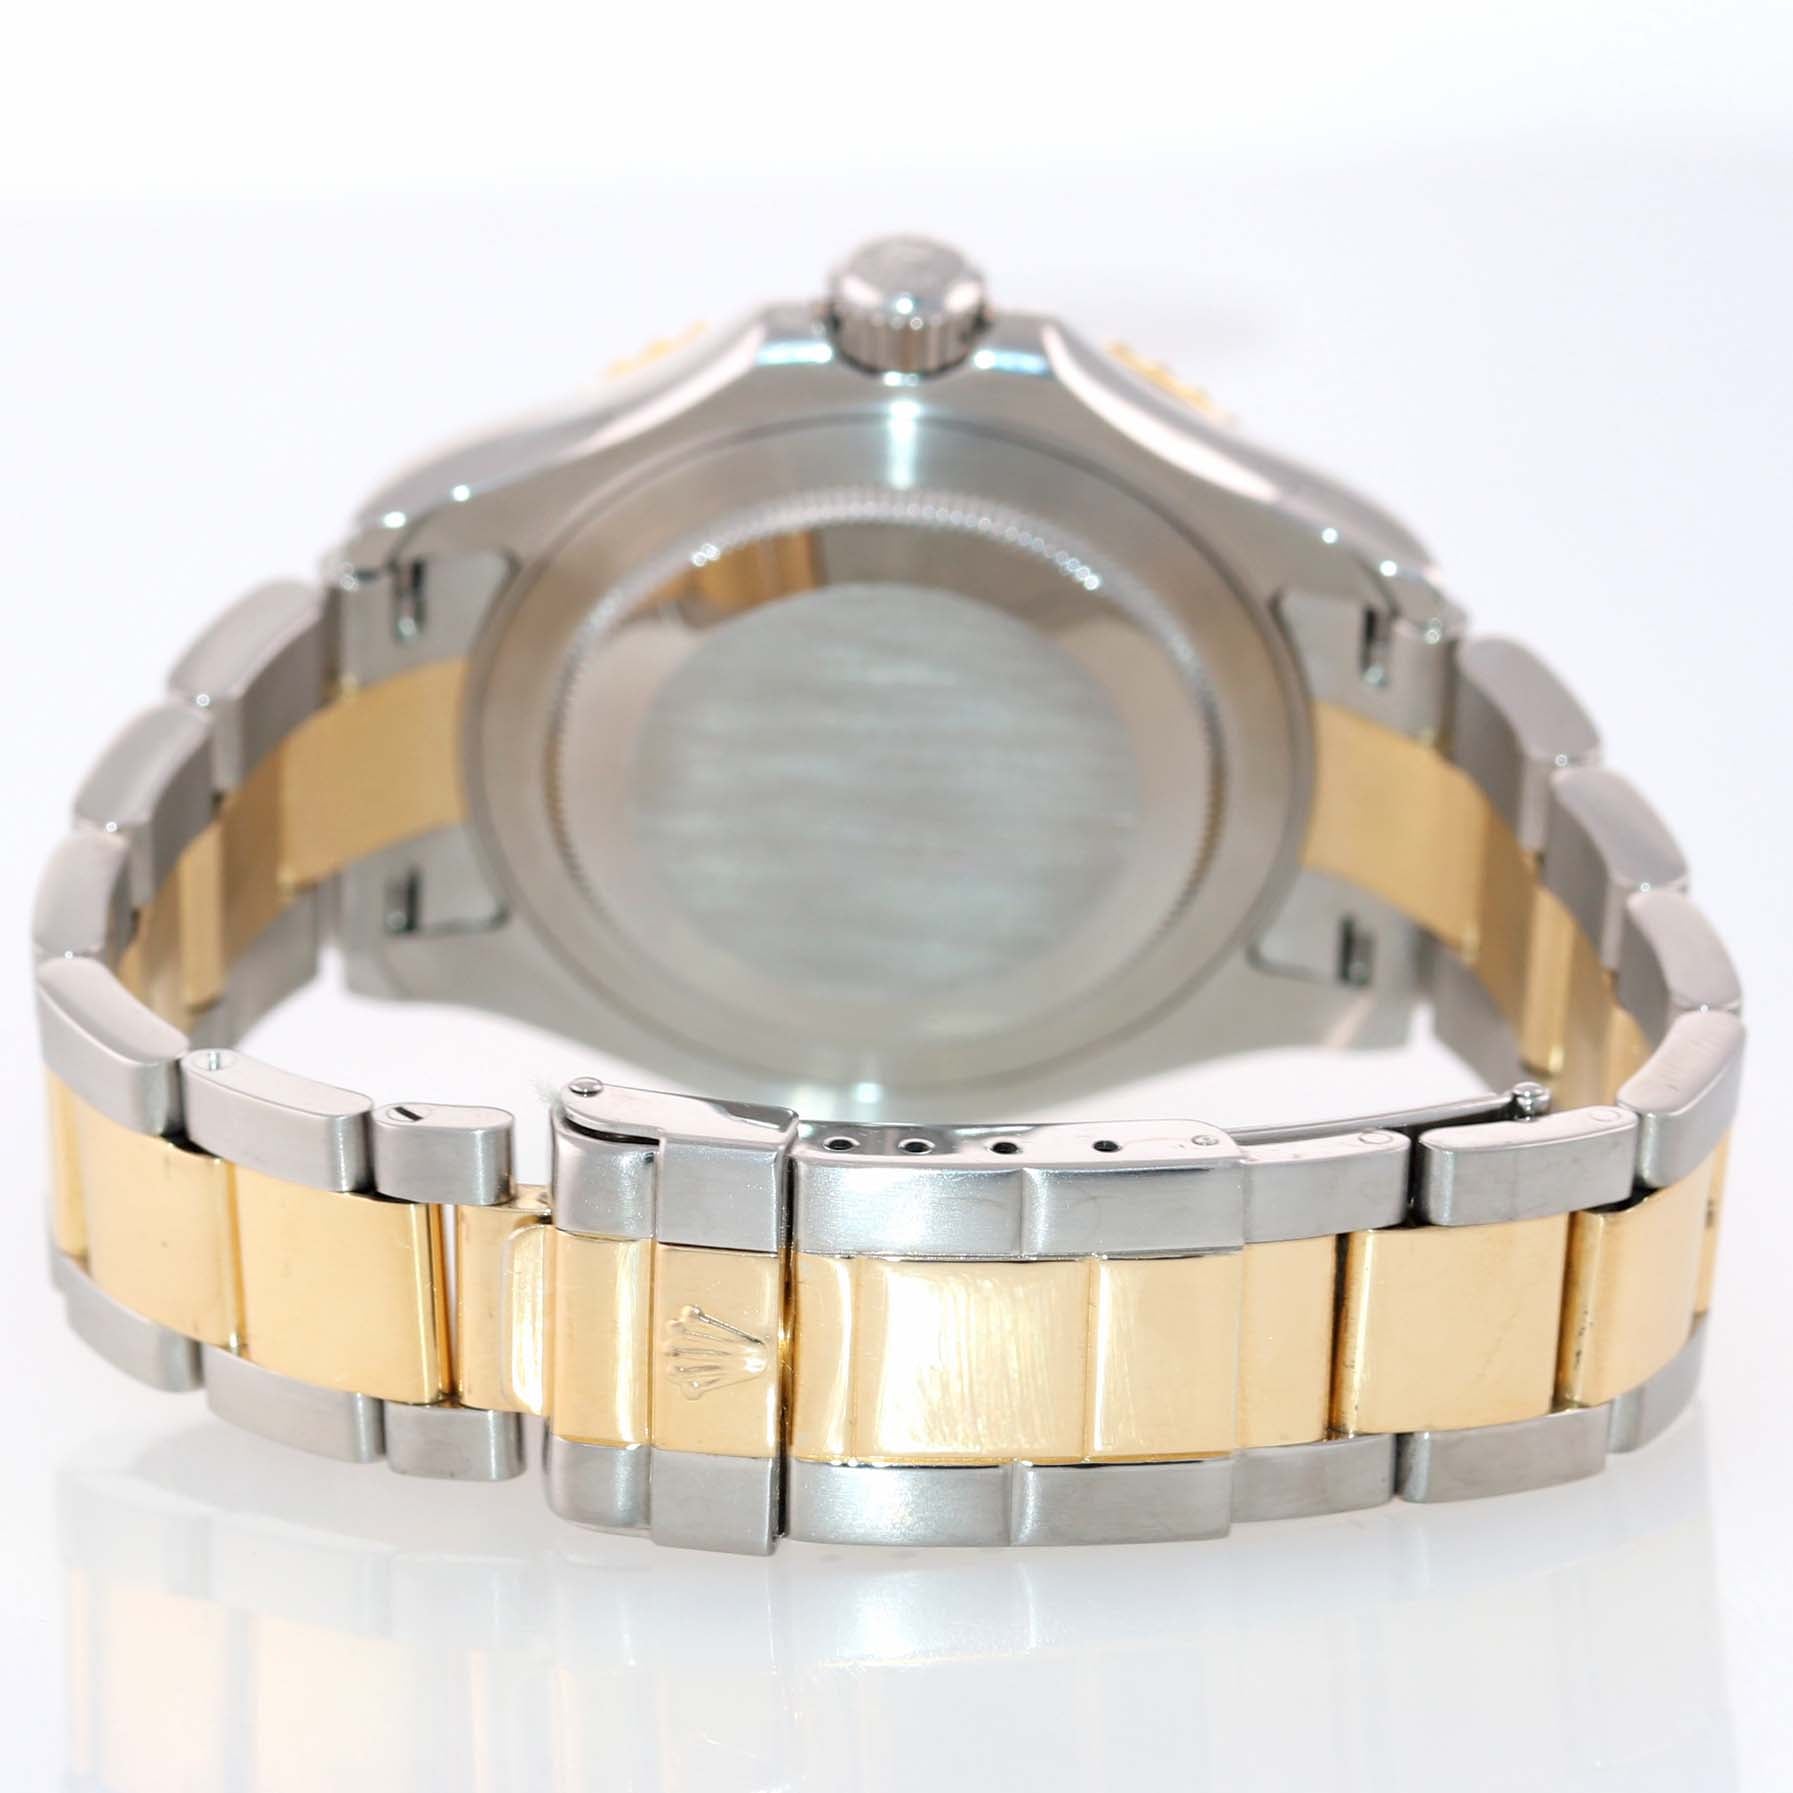 2007 PAPERS FACTORY MOP DIAMOND 16623 Rolex Two Tone Gold Yachtmaster Box Watch